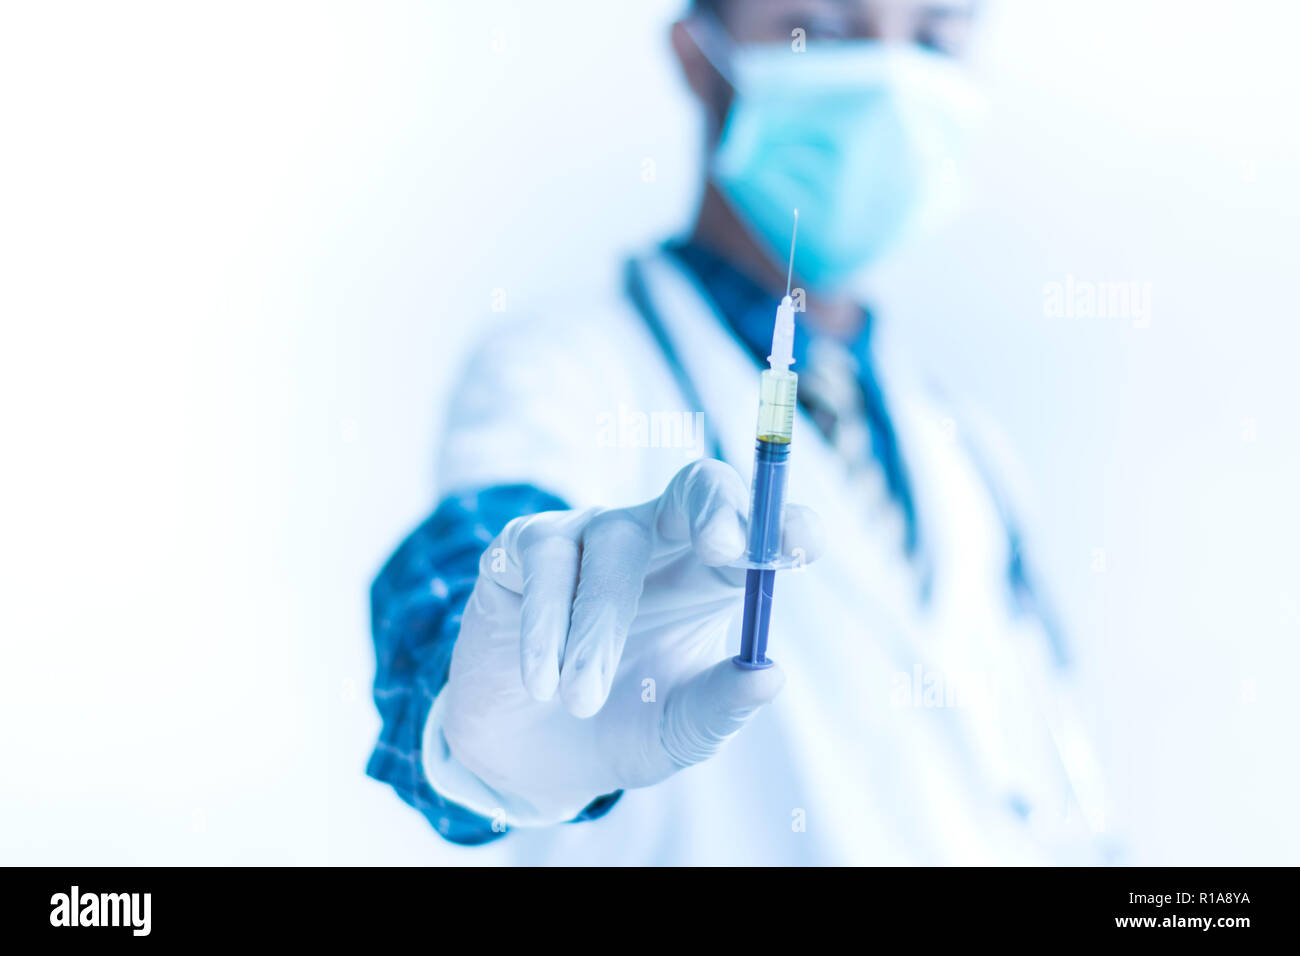 Doctor with Syringe ready to take injection healthcare concept image Stock Photo